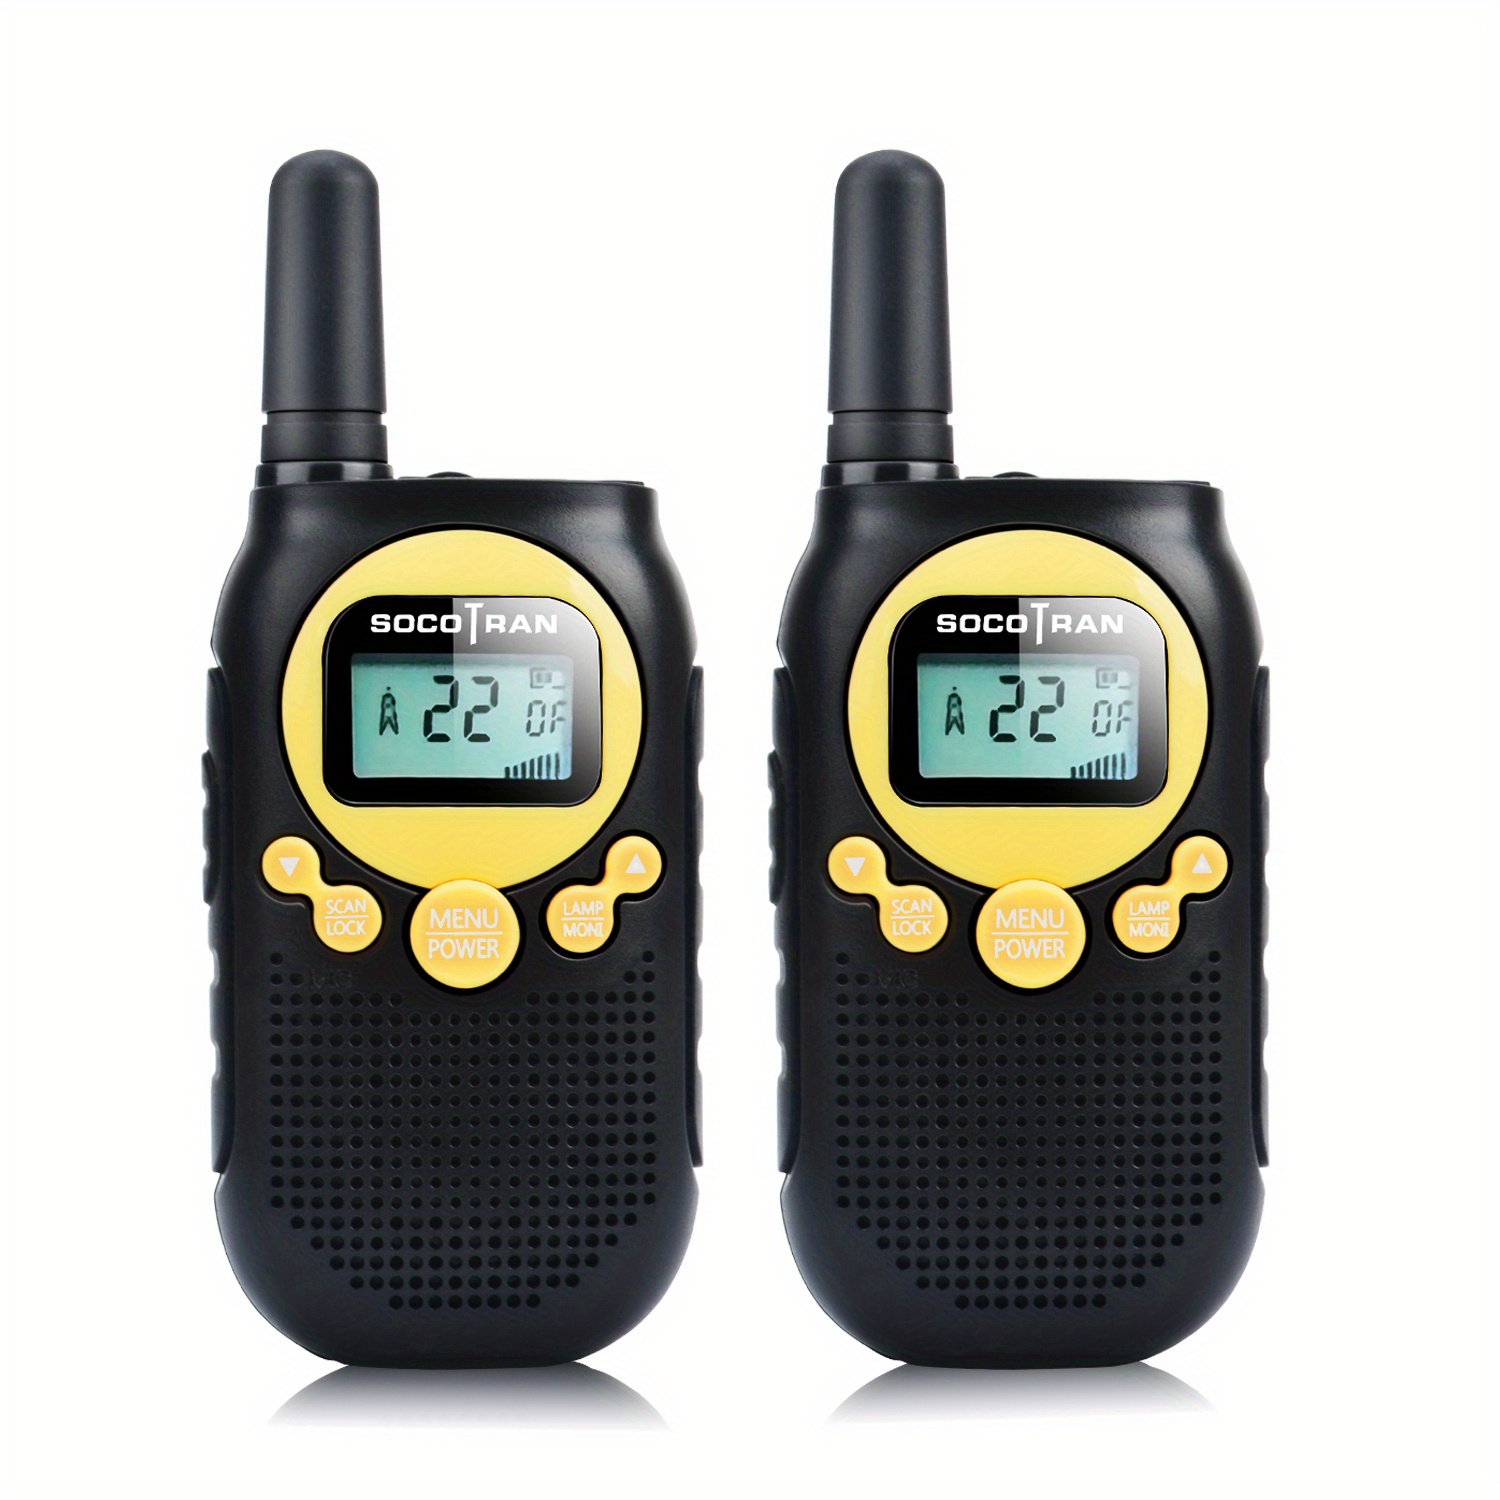 rechargeable walkie talkies for adults long range 5 miles usb charger 22ch vox flashlight lcd frs two ways radio rechargeable li ion battery 2 packs for christmas gift camping family road trip hiking walky talky